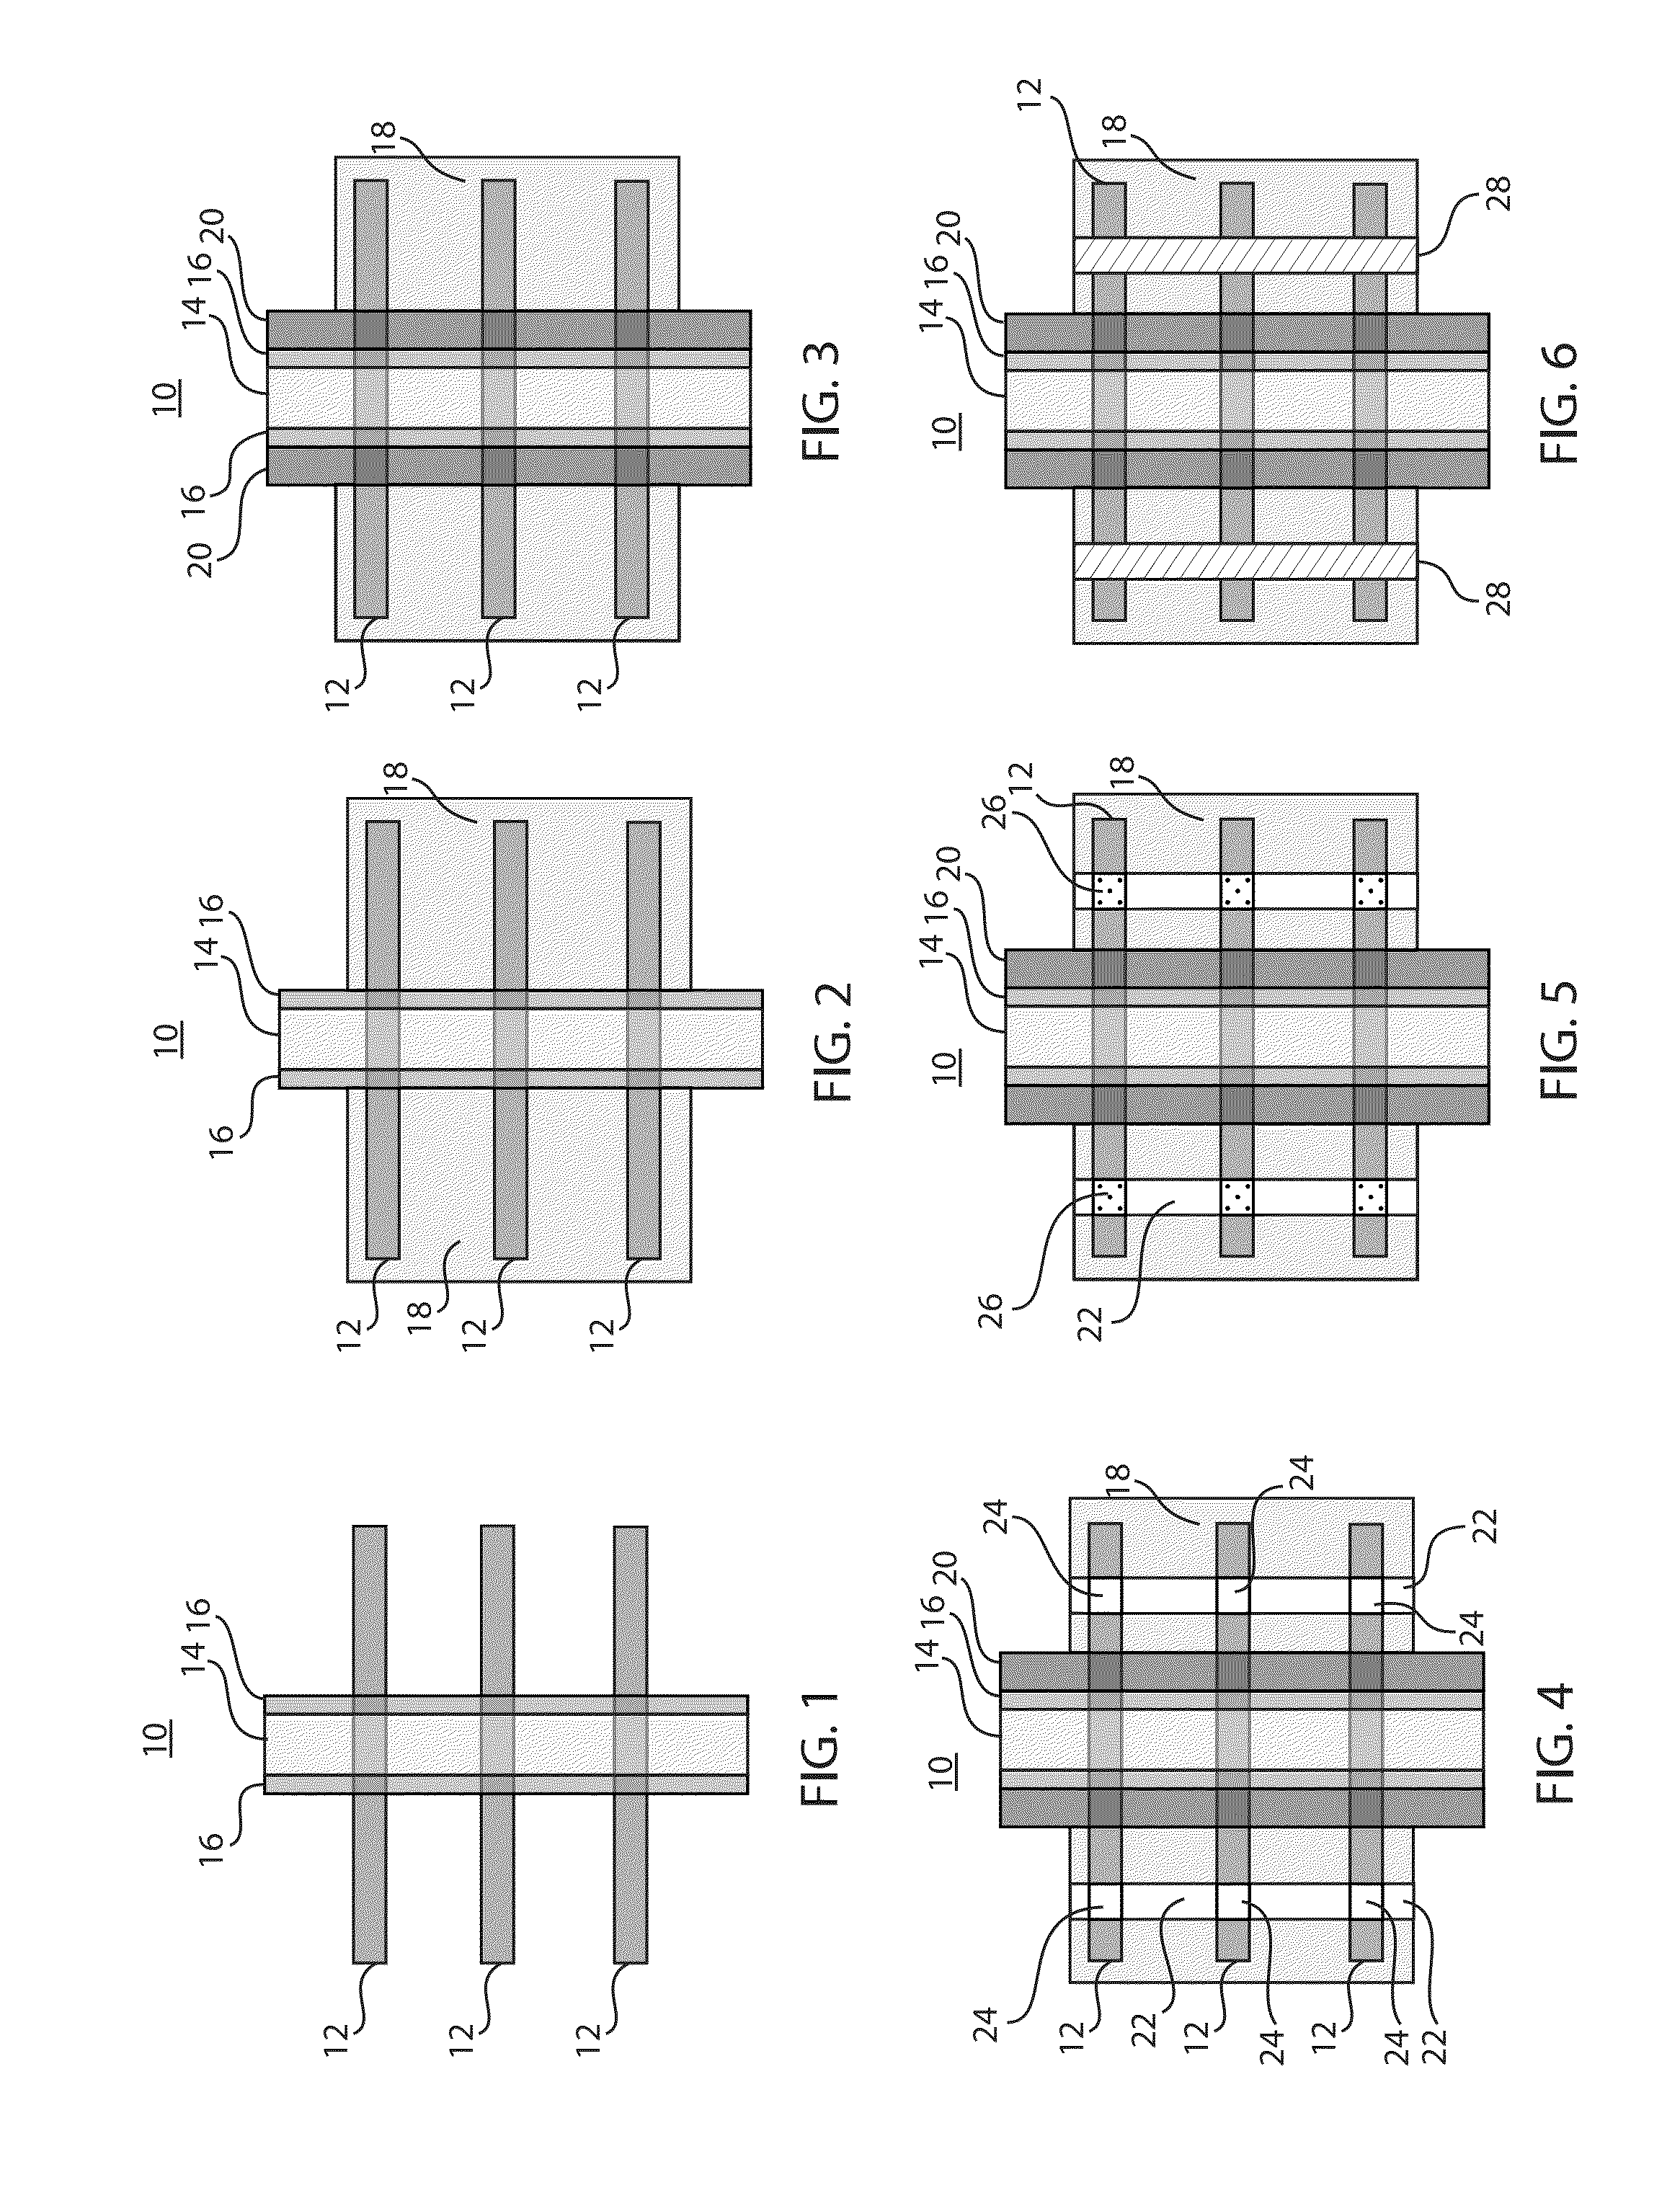 Contact resistance reduction in finfets